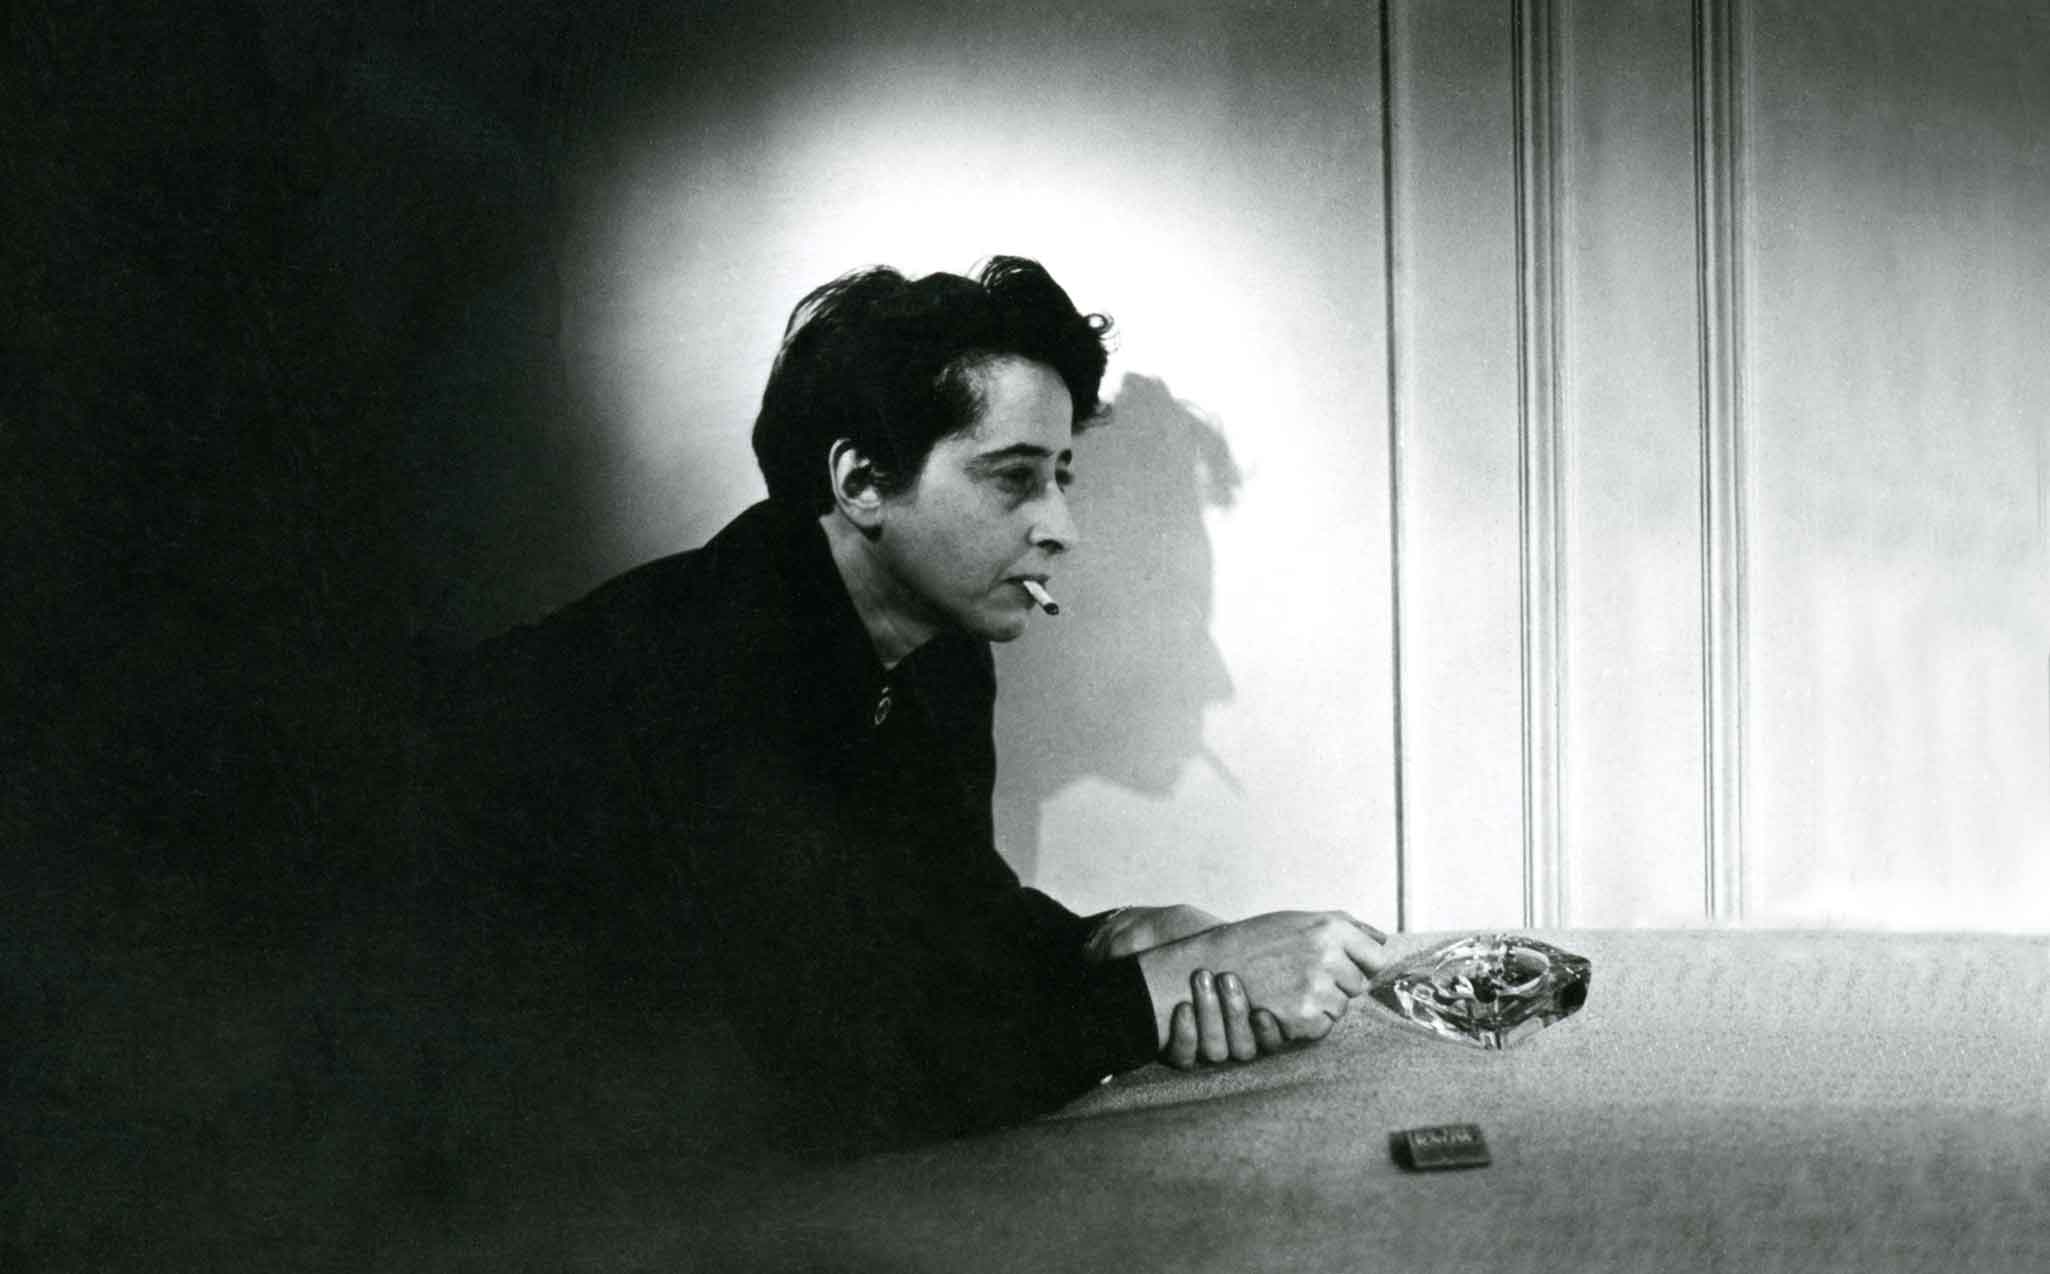 Arendt deep in thought. Image courtesy of the Film Forum.